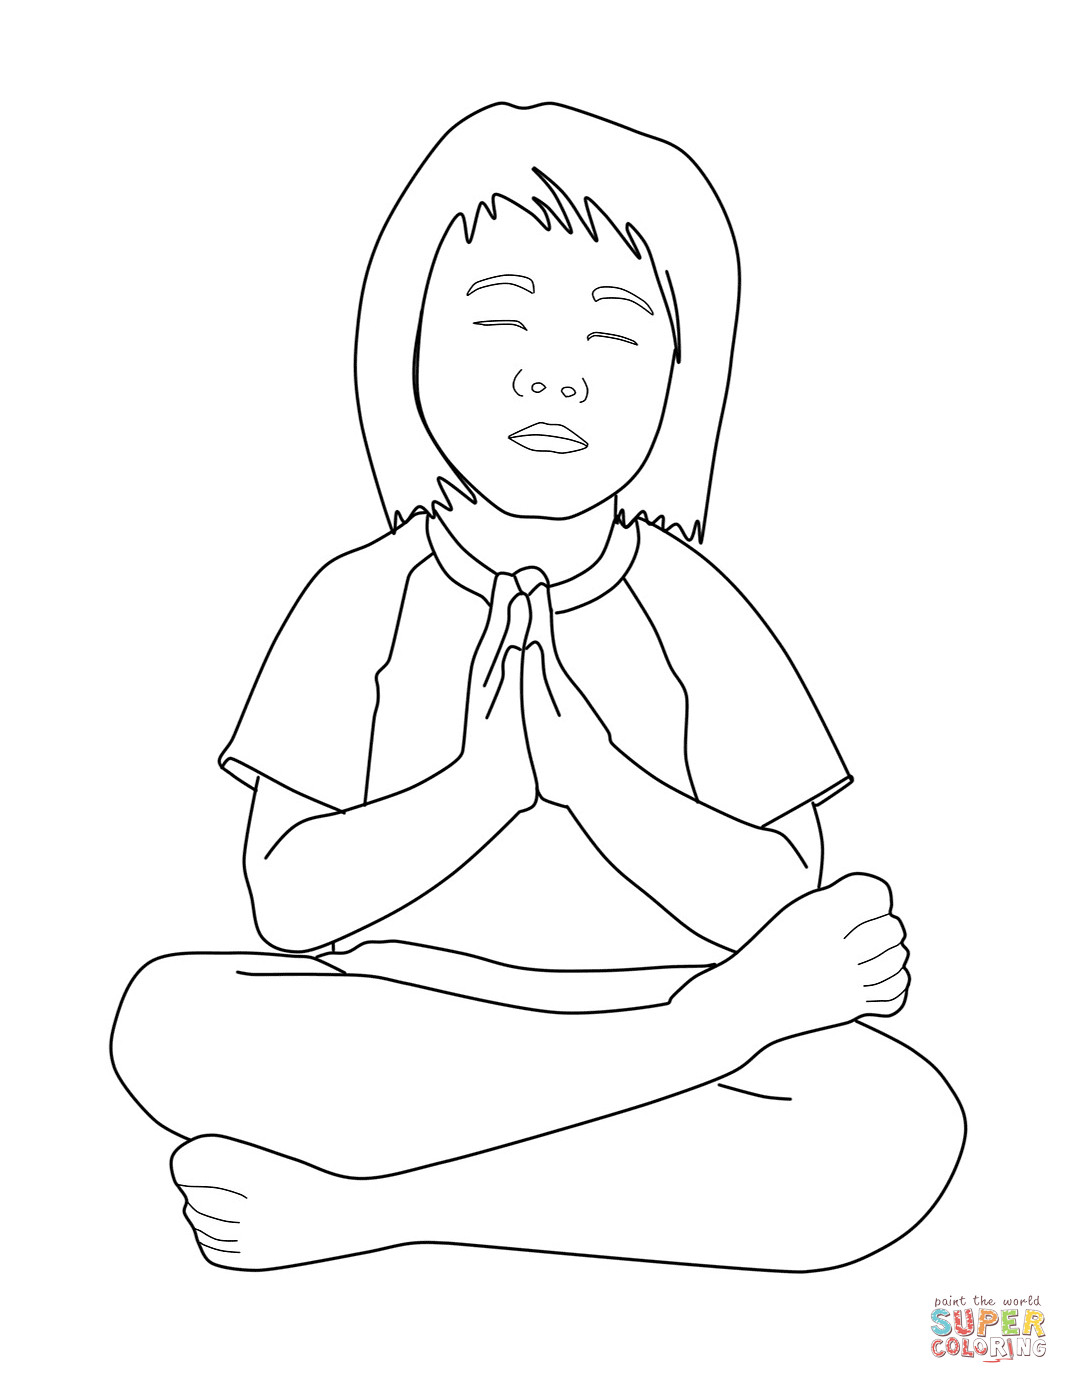 Child Coloring Page
 Praying Child coloring page